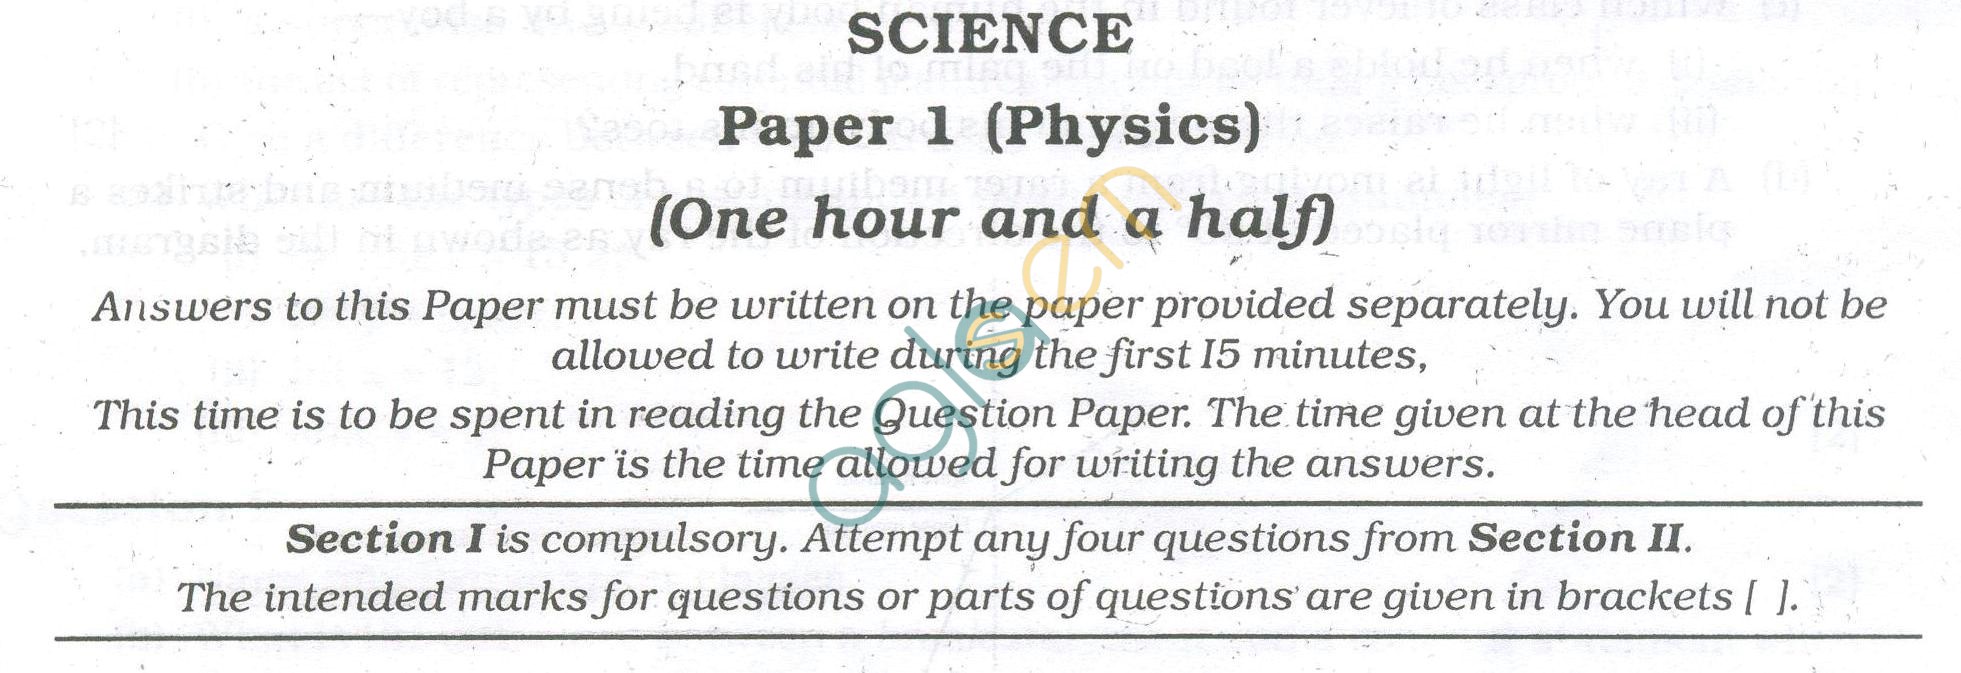 ICSE Question Papers 2013 for Class 10 - Physics/